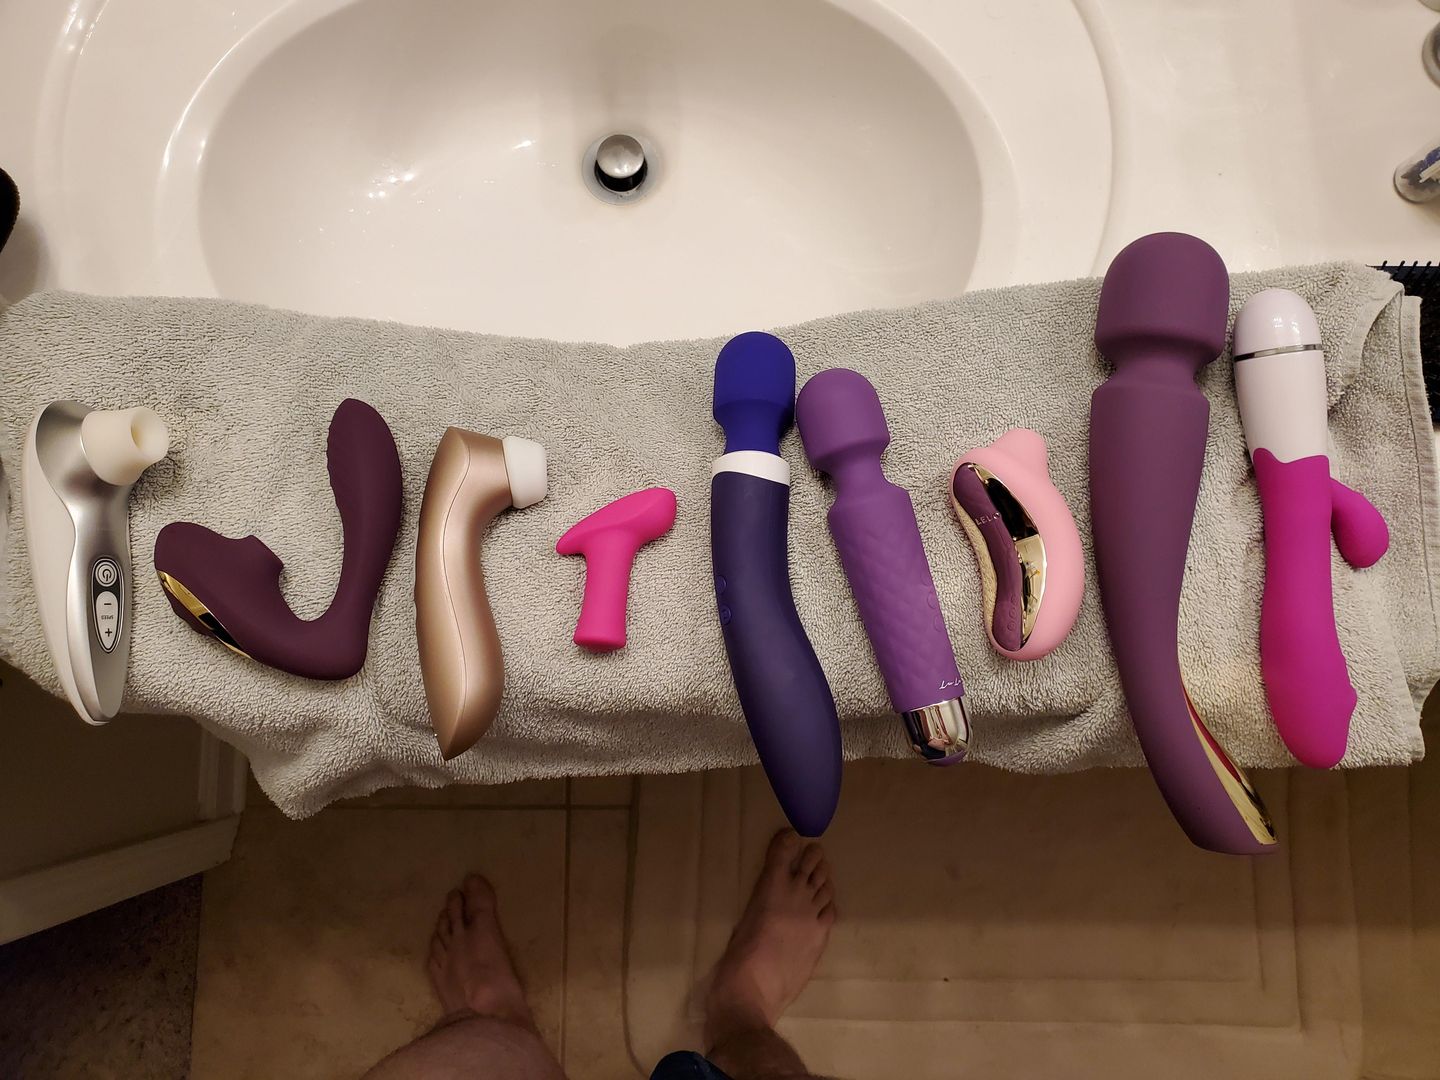 Weekly cleaning of my wifes sex toys